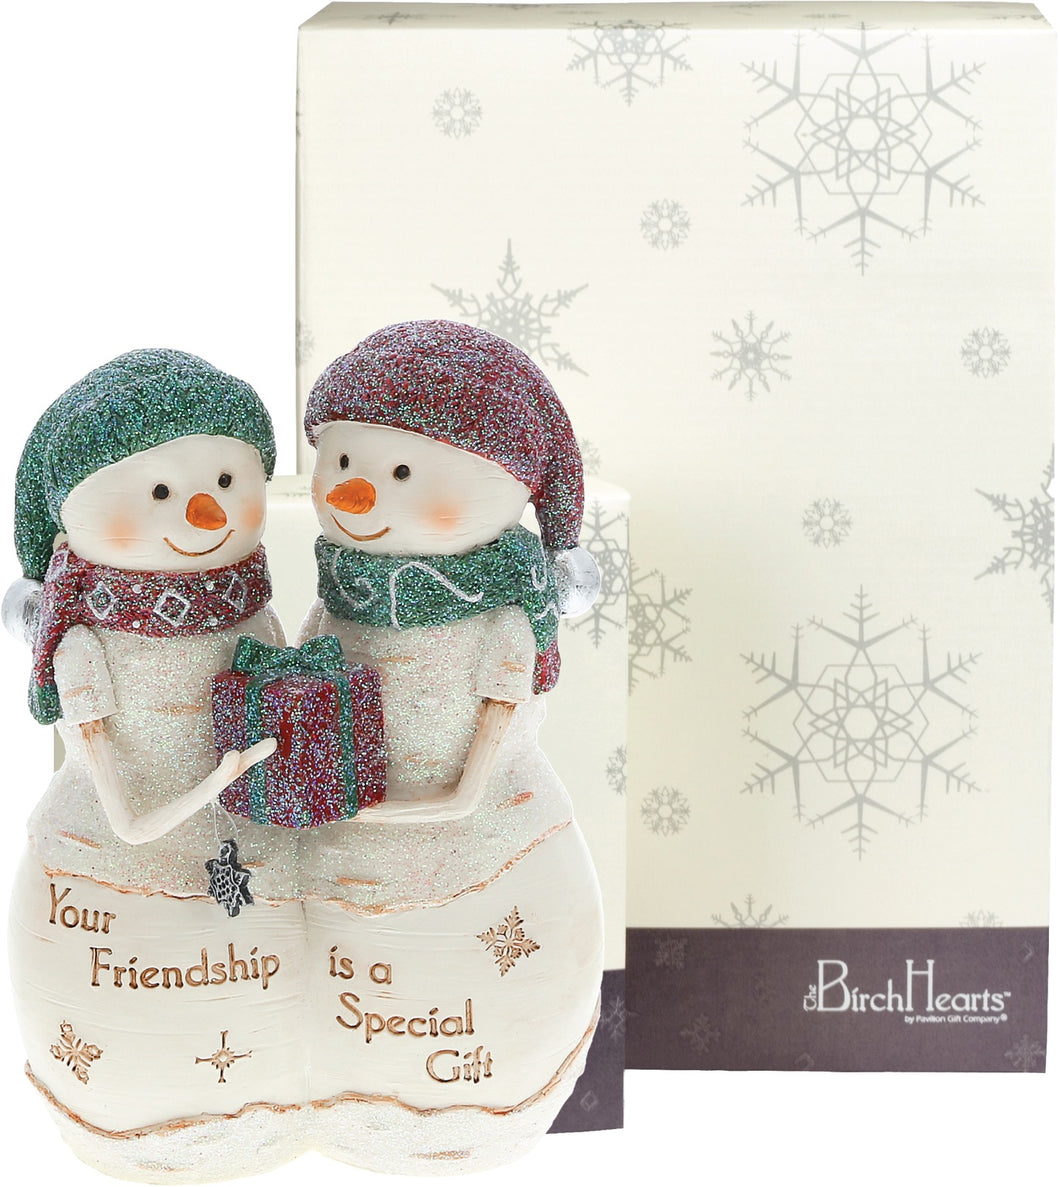 Your Friendship Is A Special Gift Birchhearts Snowman